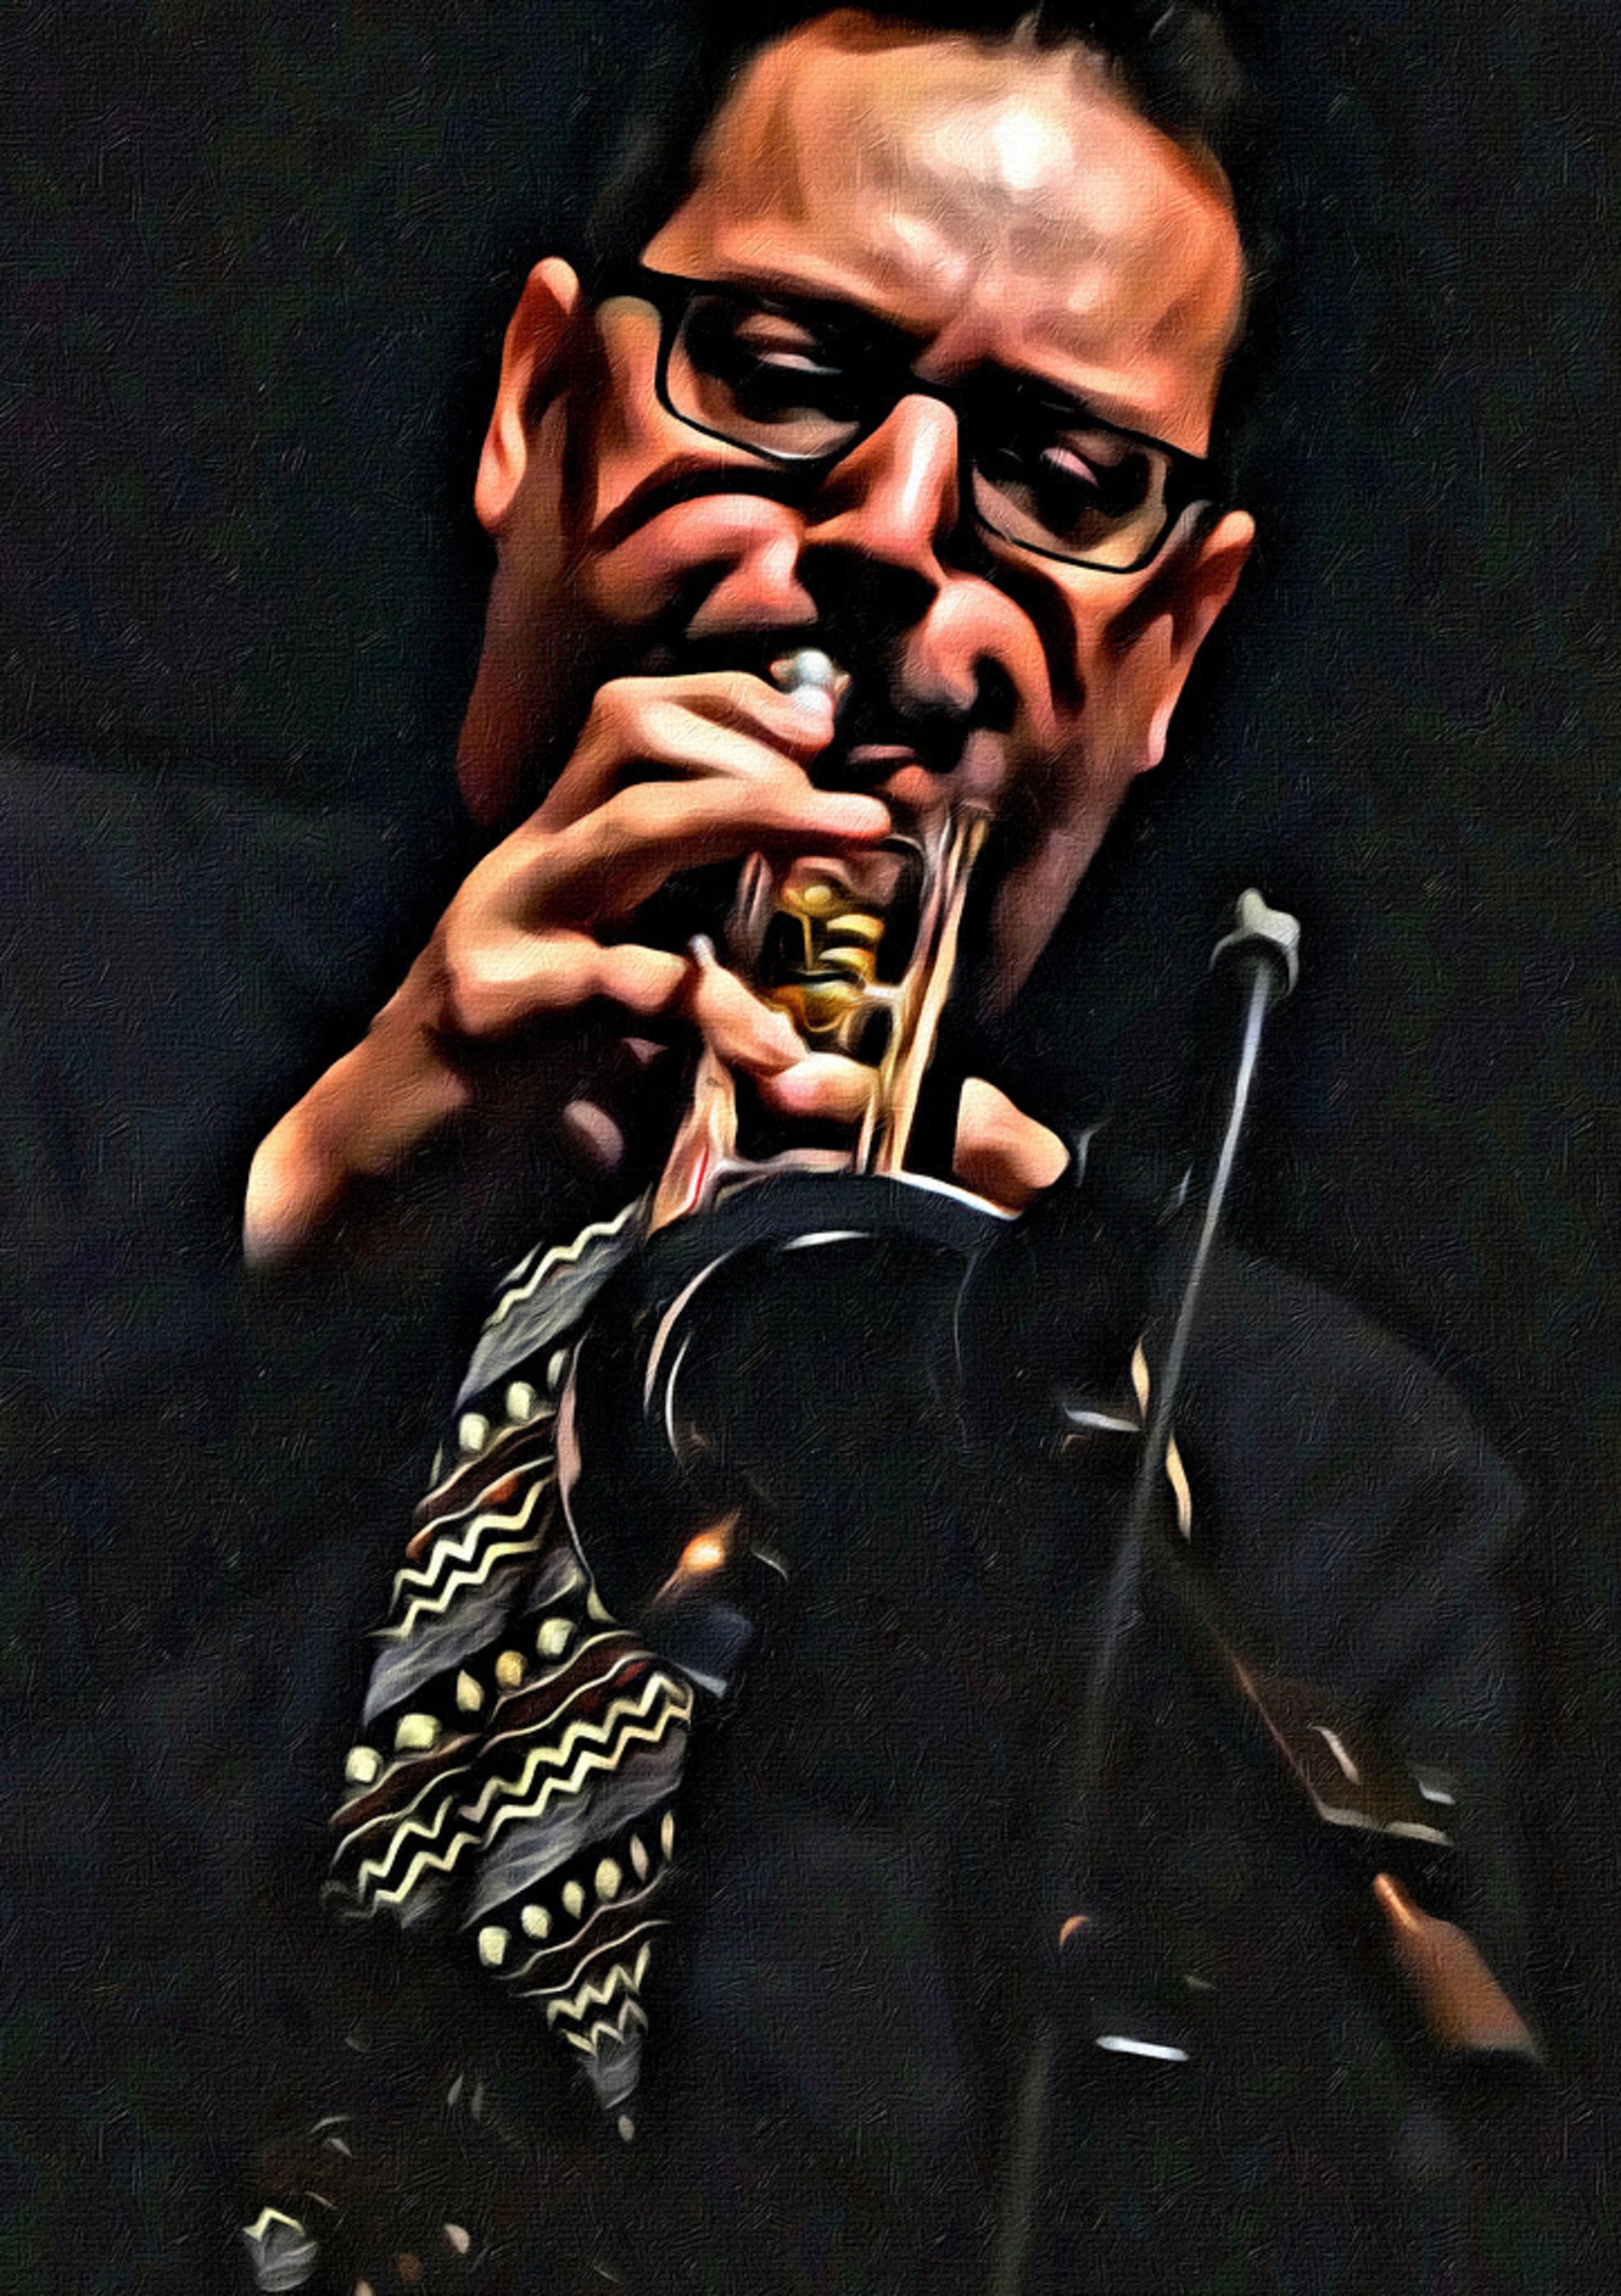 Chris Rogers' MILES DAVIS TRIBUTE SHOW Sept 14th @ the Bitter End